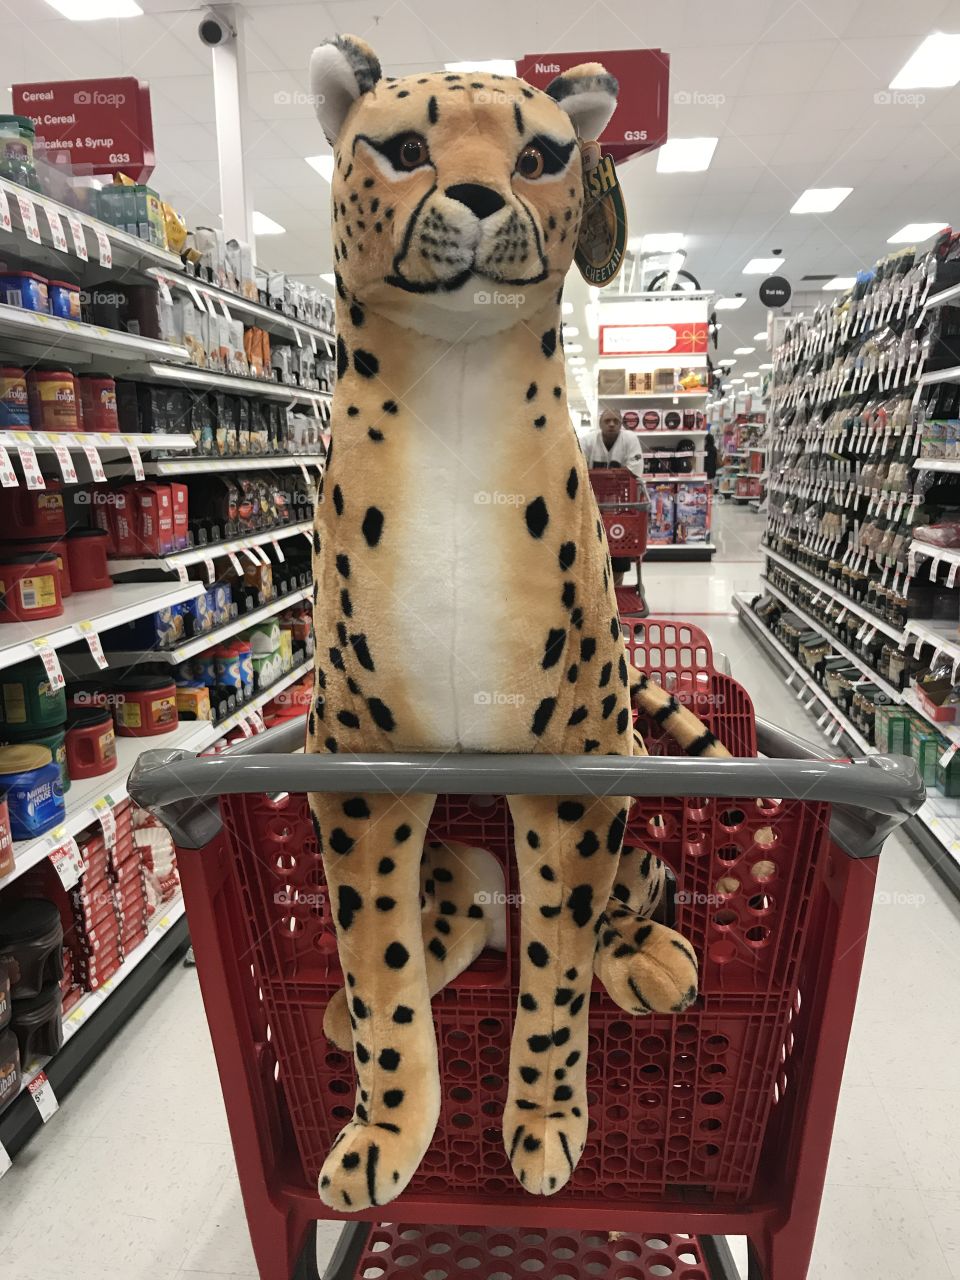 Cheetah in a grocery cart